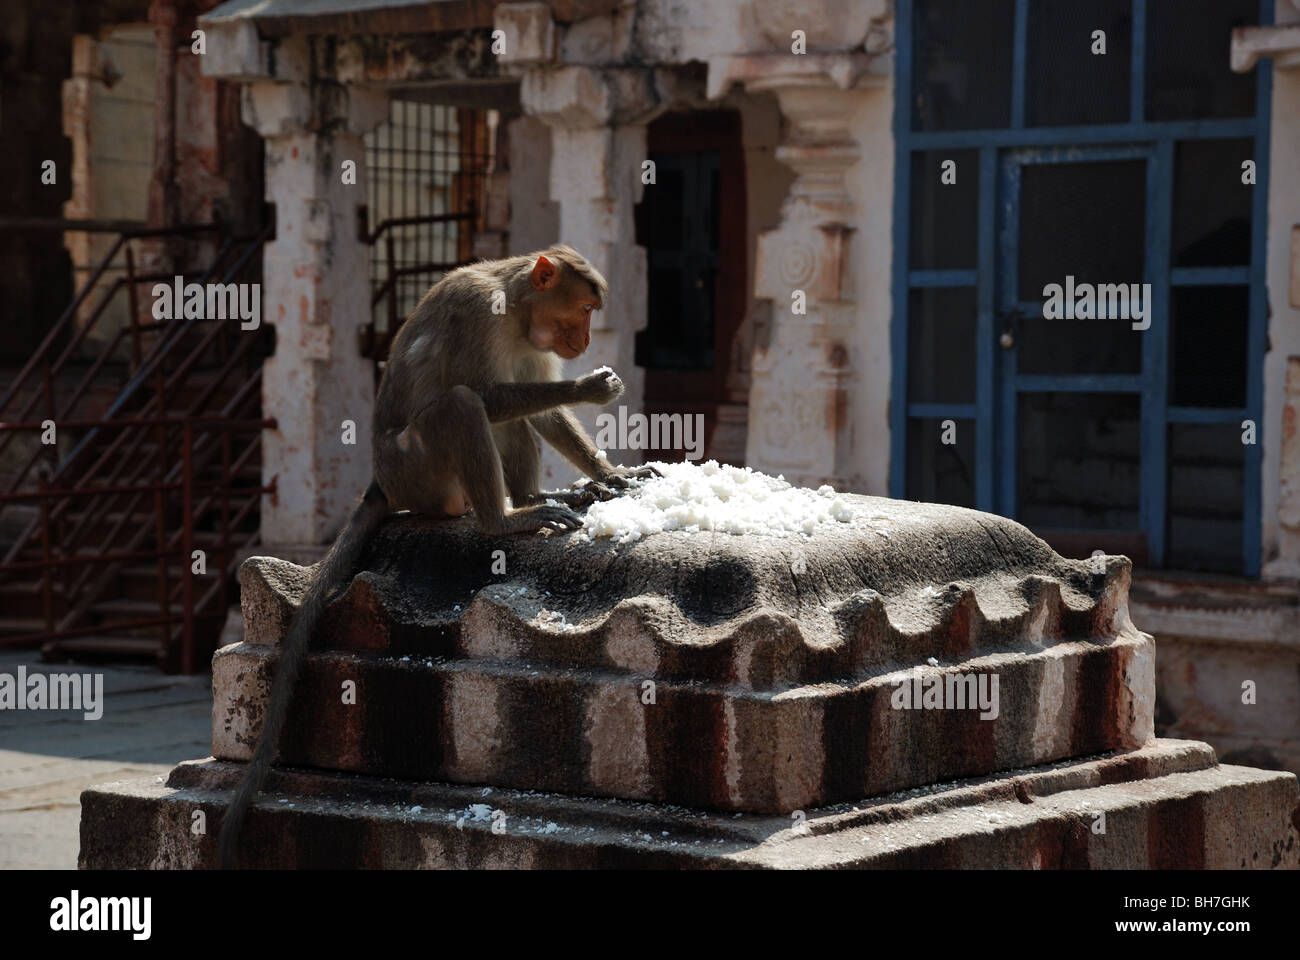 Monkey eating coconut at temple in Hampi, india. Stock Photo